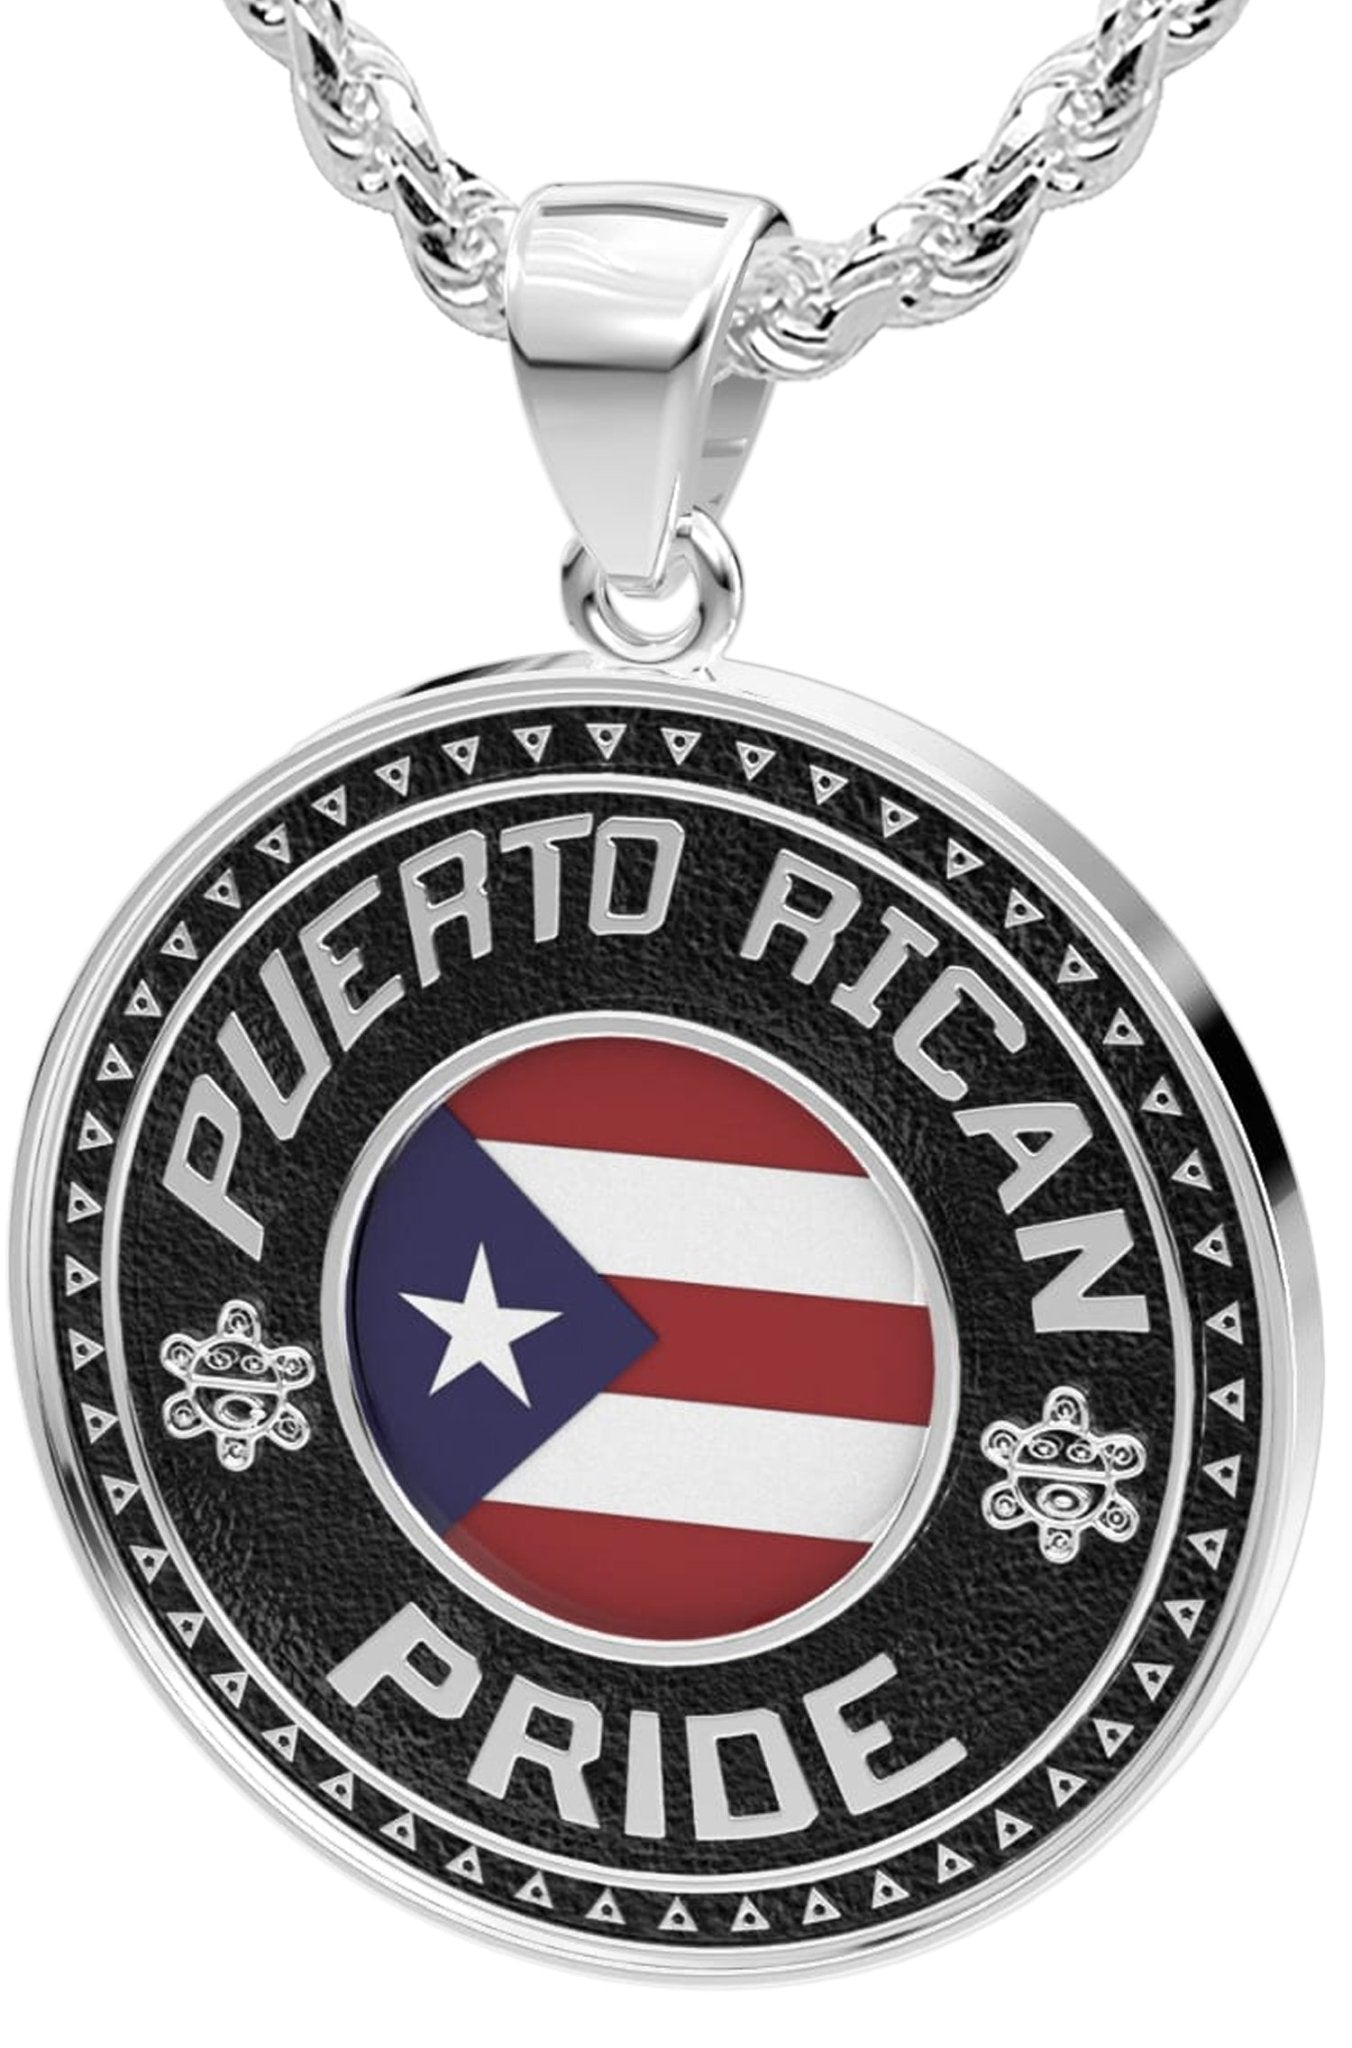 Men's 925 Sterling Silver Puerto Rican Pride Medal Pendant Necklace with Flag, 33mm - US Jewels